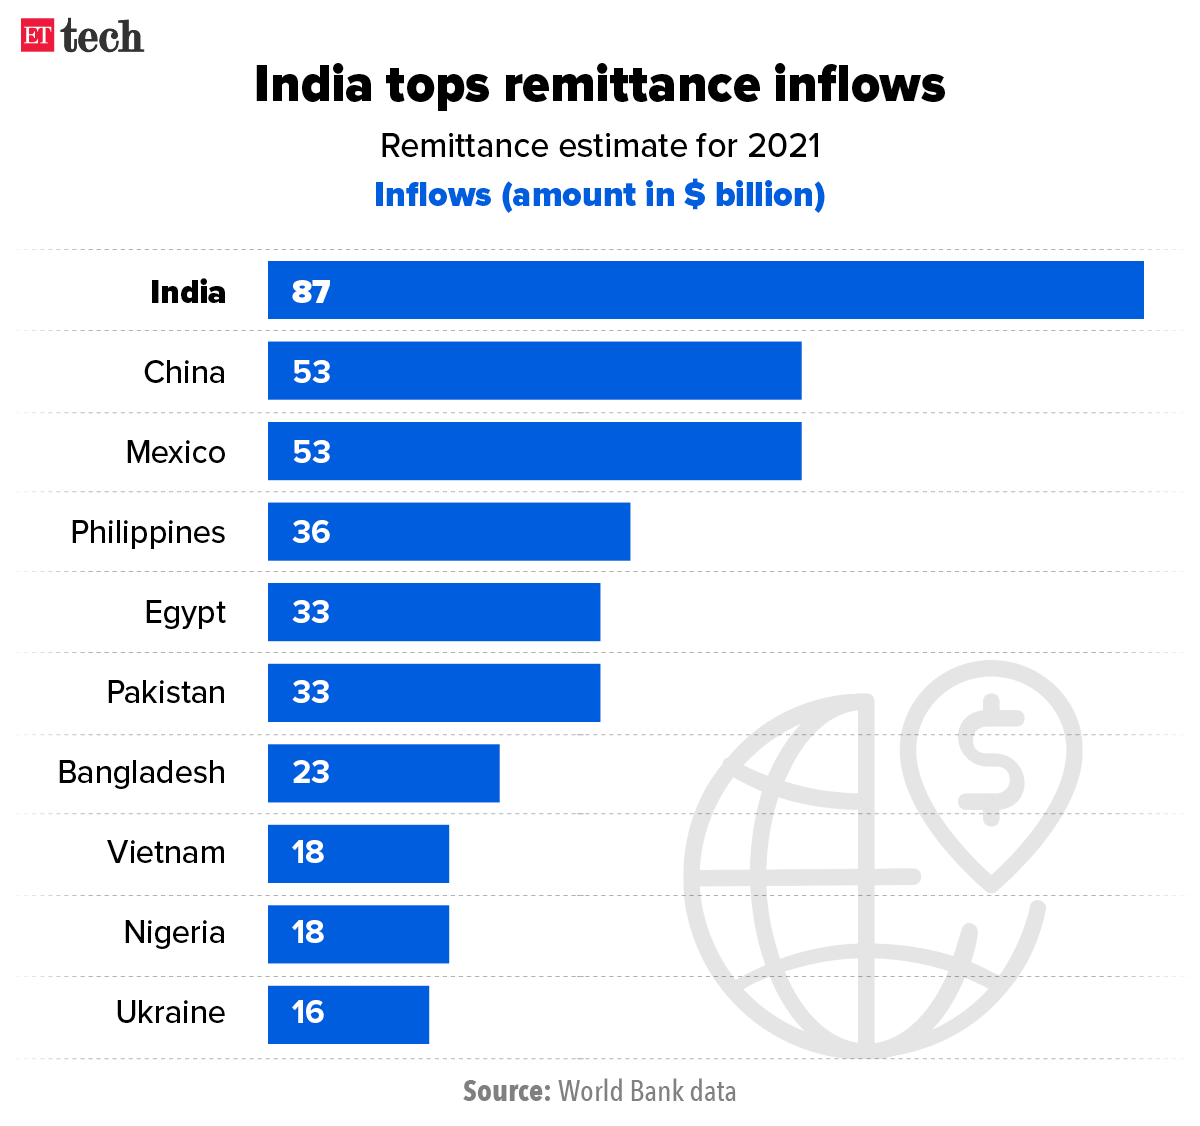 India tops remittance inflows